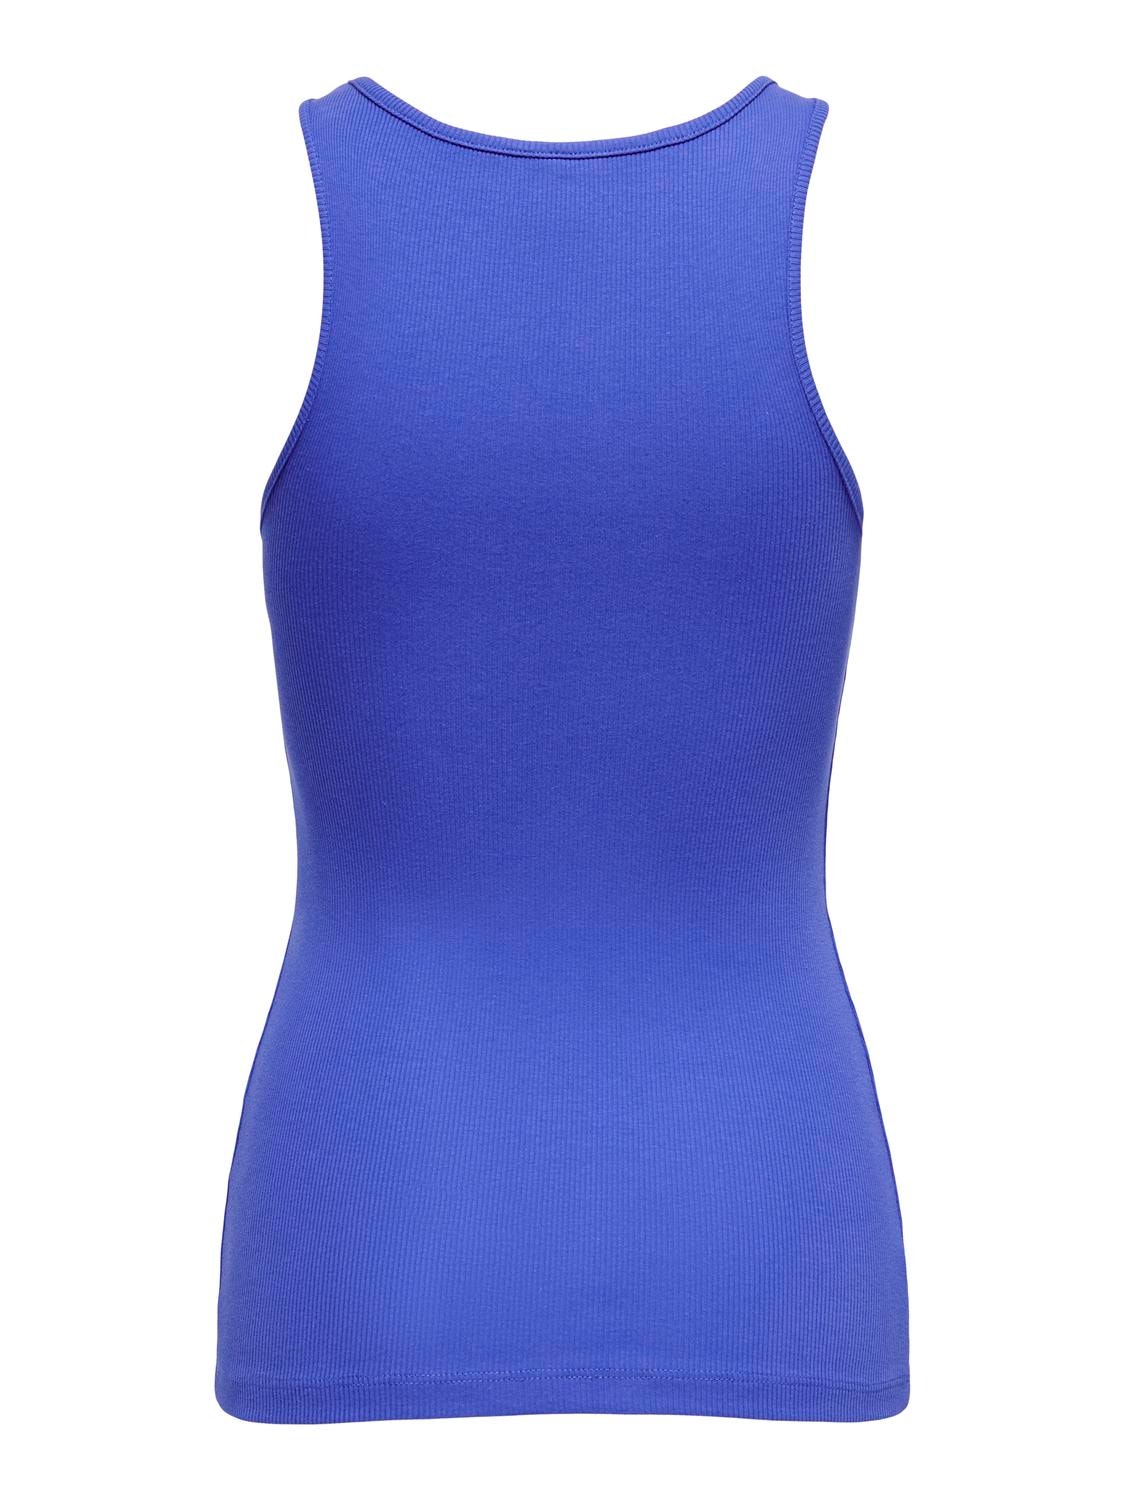 ONLY Regular Fit Round Neck Tank-Top -Dazzling Blue - 15234659